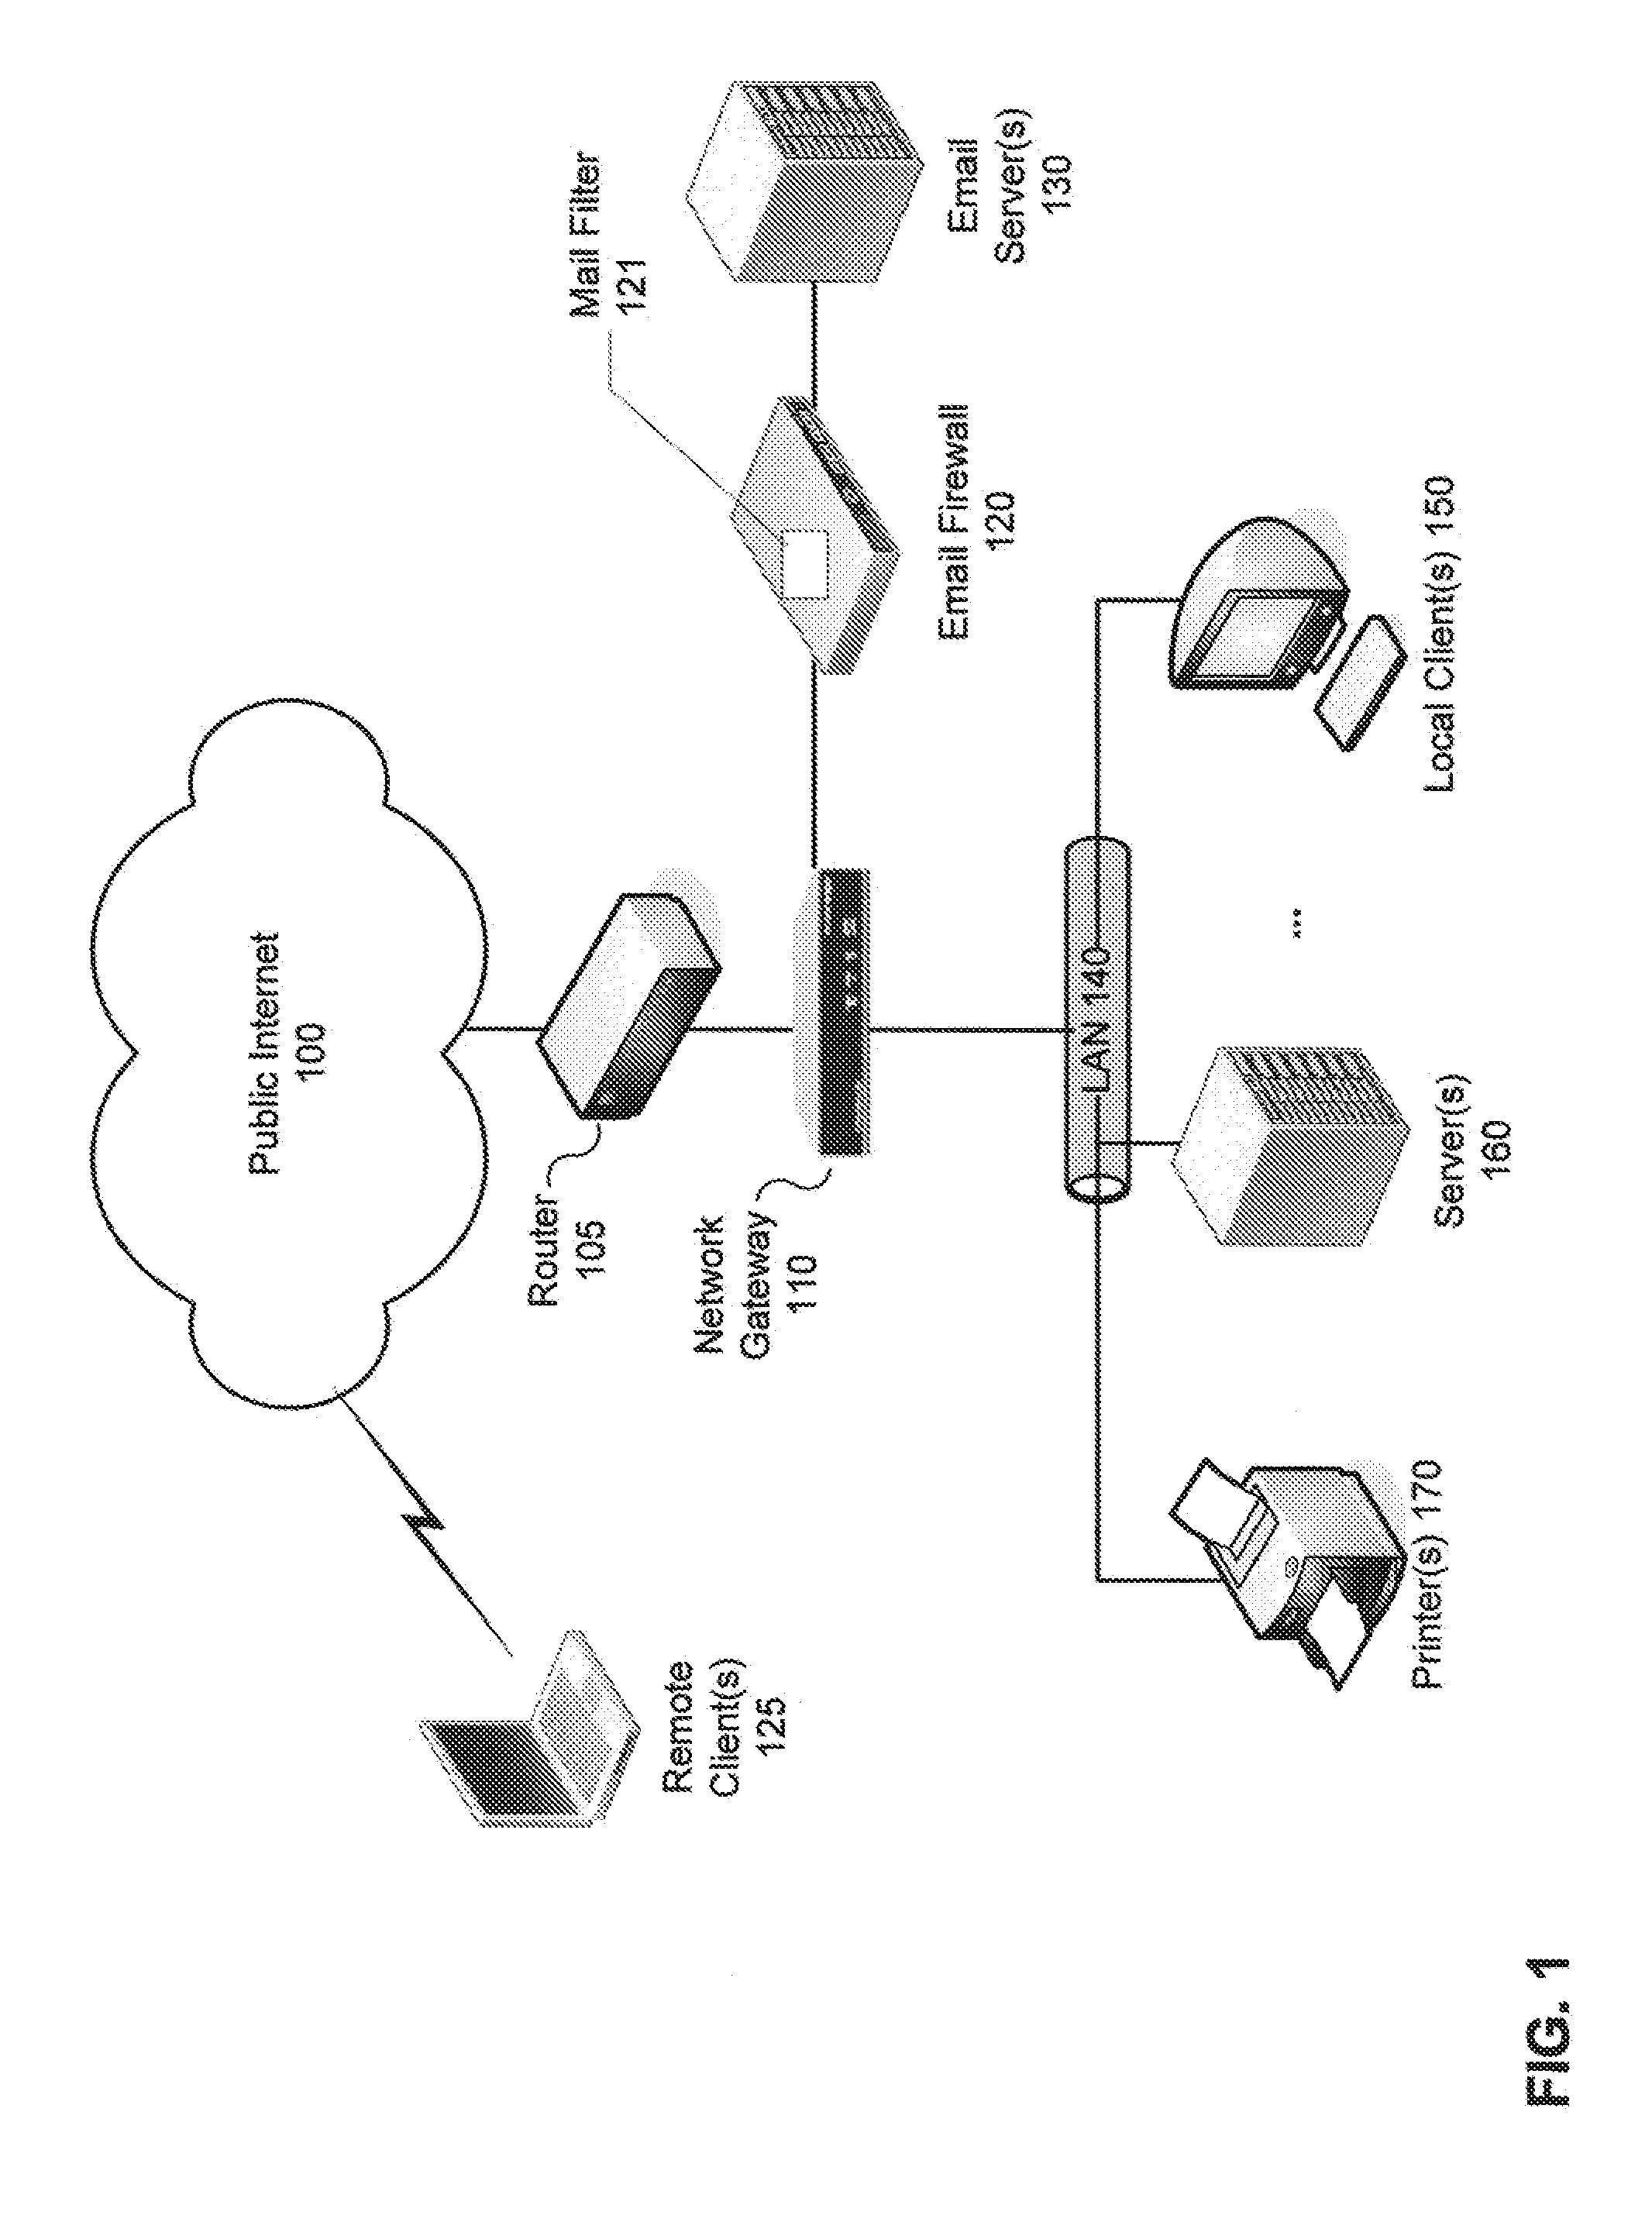 Heuristic detection of probable misspelled addresses in electronic communications